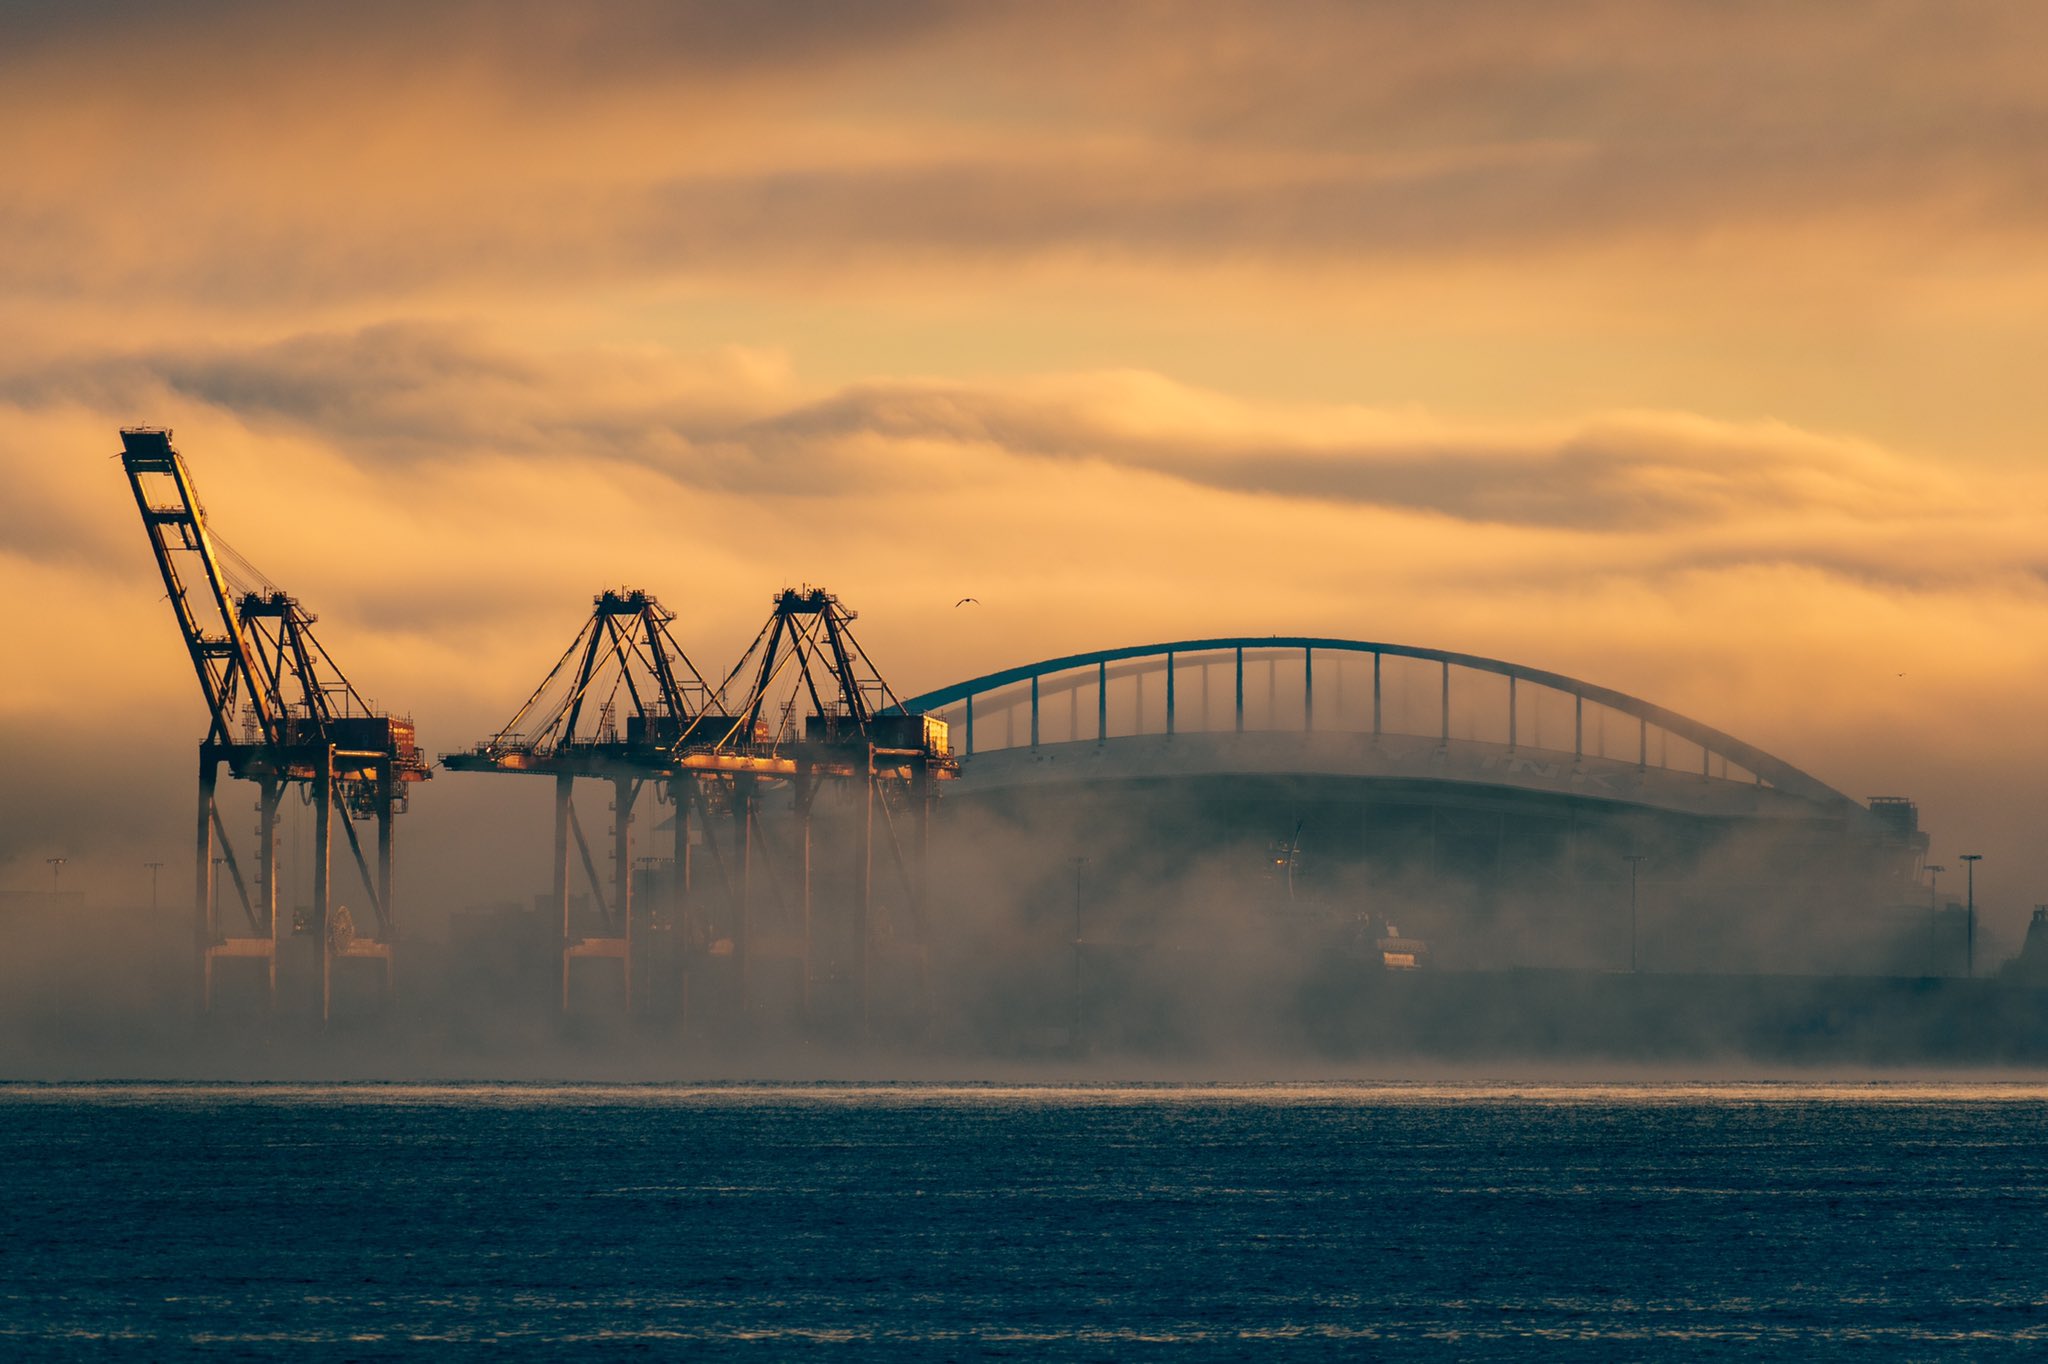 3rd Place Foggy morning on the Puget Sound by anthonyk photos @anthonykdrives